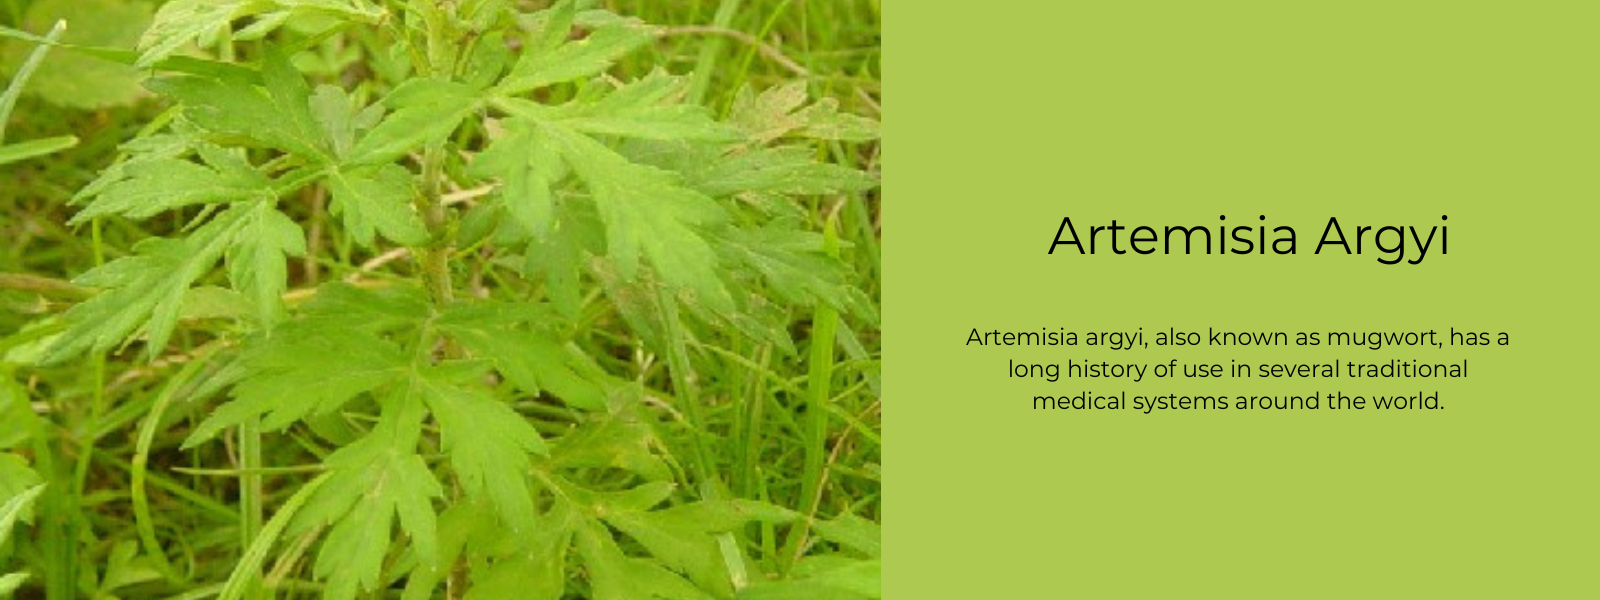 Artemisia Argyi - Health Benefits, Uses and Important Facts